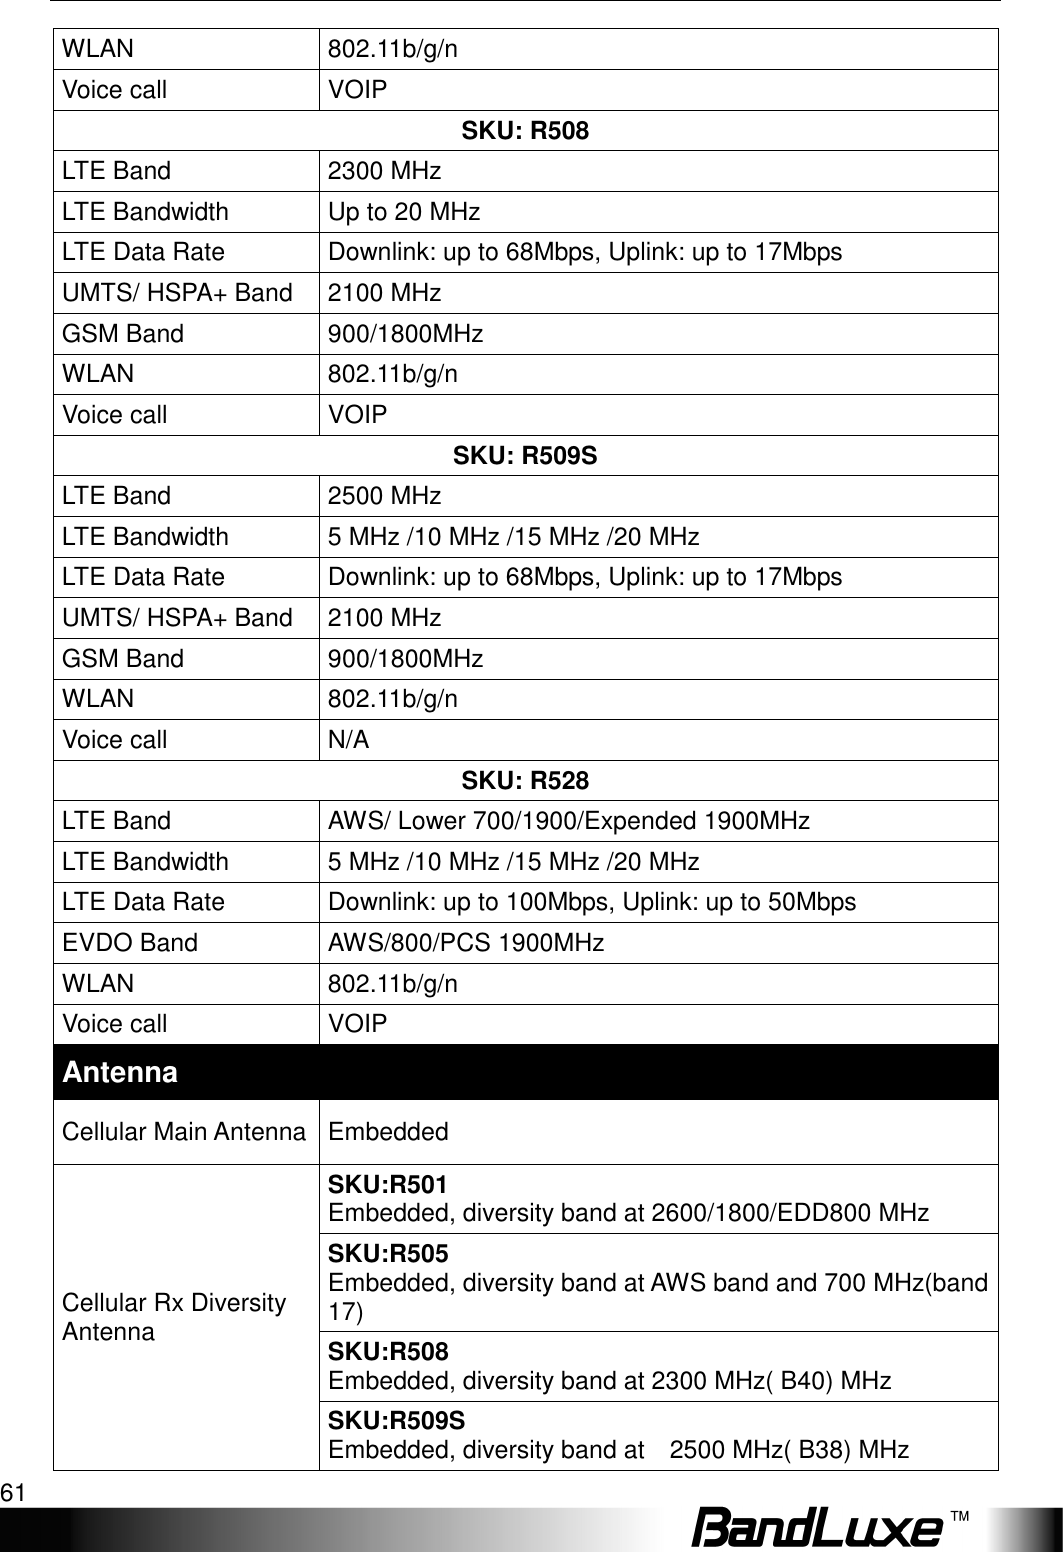   Appendix B: Specification 61 WLAN  802.11b/g/n Voice call  VOIP SKU: R508 LTE Band  2300 MHz LTE Bandwidth  Up to 20 MHz LTE Data Rate  Downlink: up to 68Mbps, Uplink: up to 17Mbps UMTS/ HSPA+ Band  2100 MHz GSM Band  900/1800MHz WLAN  802.11b/g/n Voice call  VOIP SKU: R509S LTE Band  2500 MHz LTE Bandwidth  5 MHz /10 MHz /15 MHz /20 MHz LTE Data Rate  Downlink: up to 68Mbps, Uplink: up to 17Mbps UMTS/ HSPA+ Band  2100 MHz GSM Band  900/1800MHz WLAN  802.11b/g/n Voice call  N/A SKU: R528 LTE Band  AWS/ Lower 700/1900/Expended 1900MHz LTE Bandwidth  5 MHz /10 MHz /15 MHz /20 MHz LTE Data Rate  Downlink: up to 100Mbps, Uplink: up to 50Mbps EVDO Band  AWS/800/PCS 1900MHz WLAN  802.11b/g/n Voice call  VOIP Antenna Cellular Main Antenna Embedded Cellular Rx Diversity Antenna SKU:R501 Embedded, diversity band at 2600/1800/EDD800 MHz SKU:R505 Embedded, diversity band at AWS band and 700 MHz(band 17) SKU:R508 Embedded, diversity band at 2300 MHz( B40) MHz SKU:R509S Embedded, diversity band at    2500 MHz( B38) MHz 